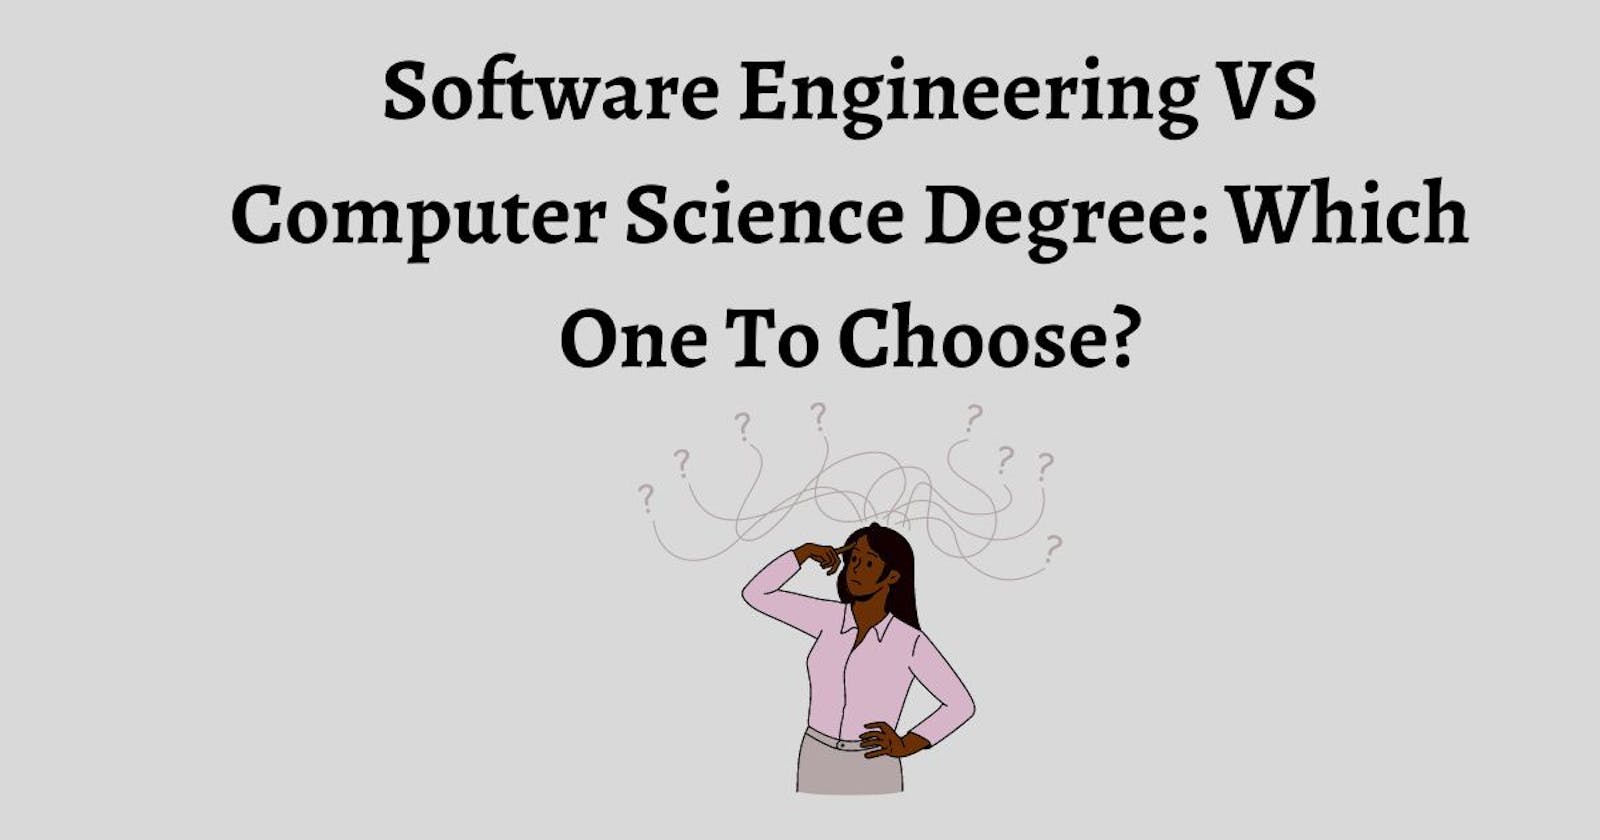 Software Engineering VS Computer Science Degree: Which One To Choose?